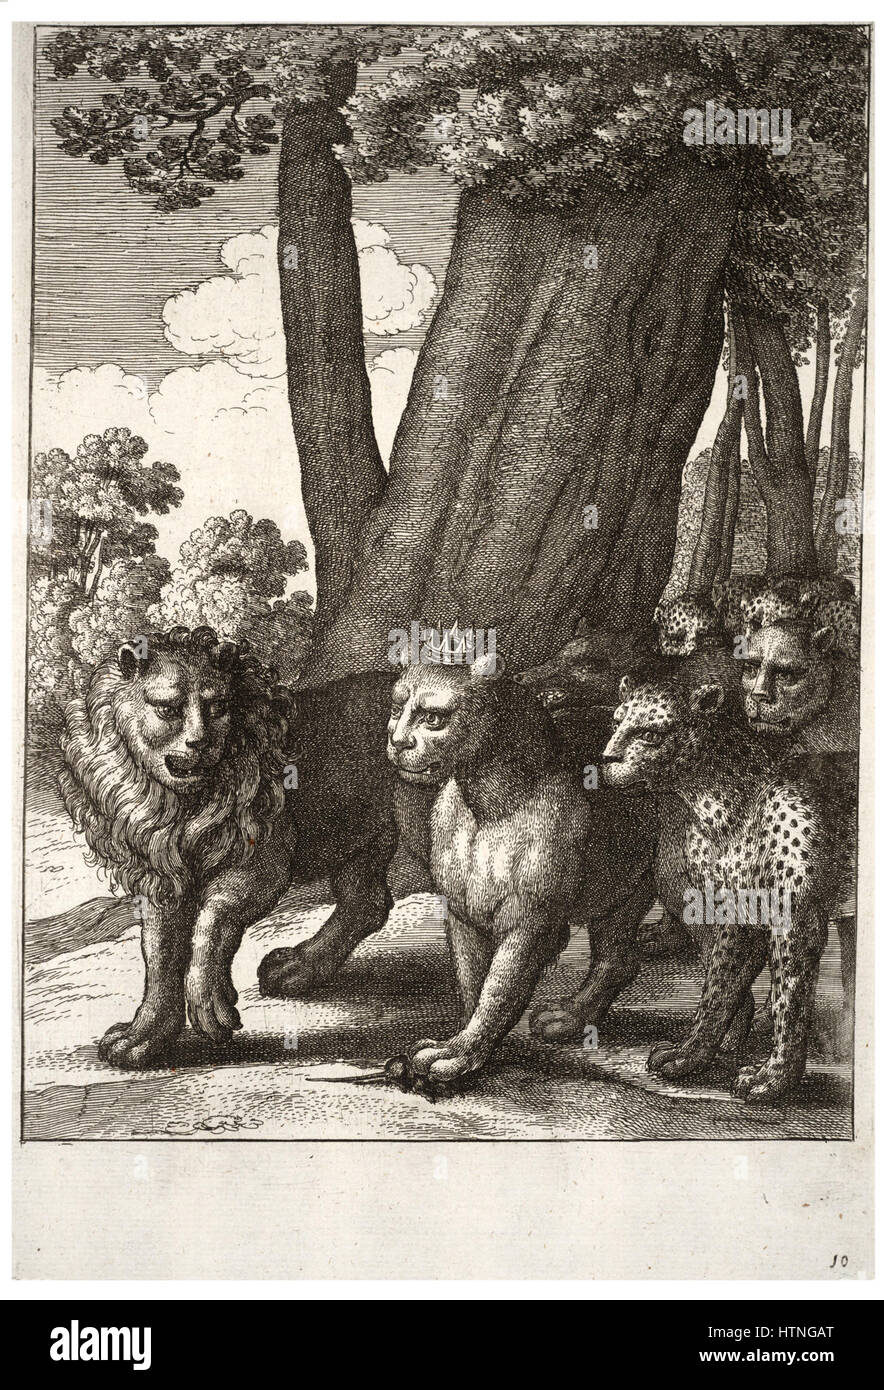 Wenceslas Hollar - The beasts of prey and the mouse 2 Stock Photo